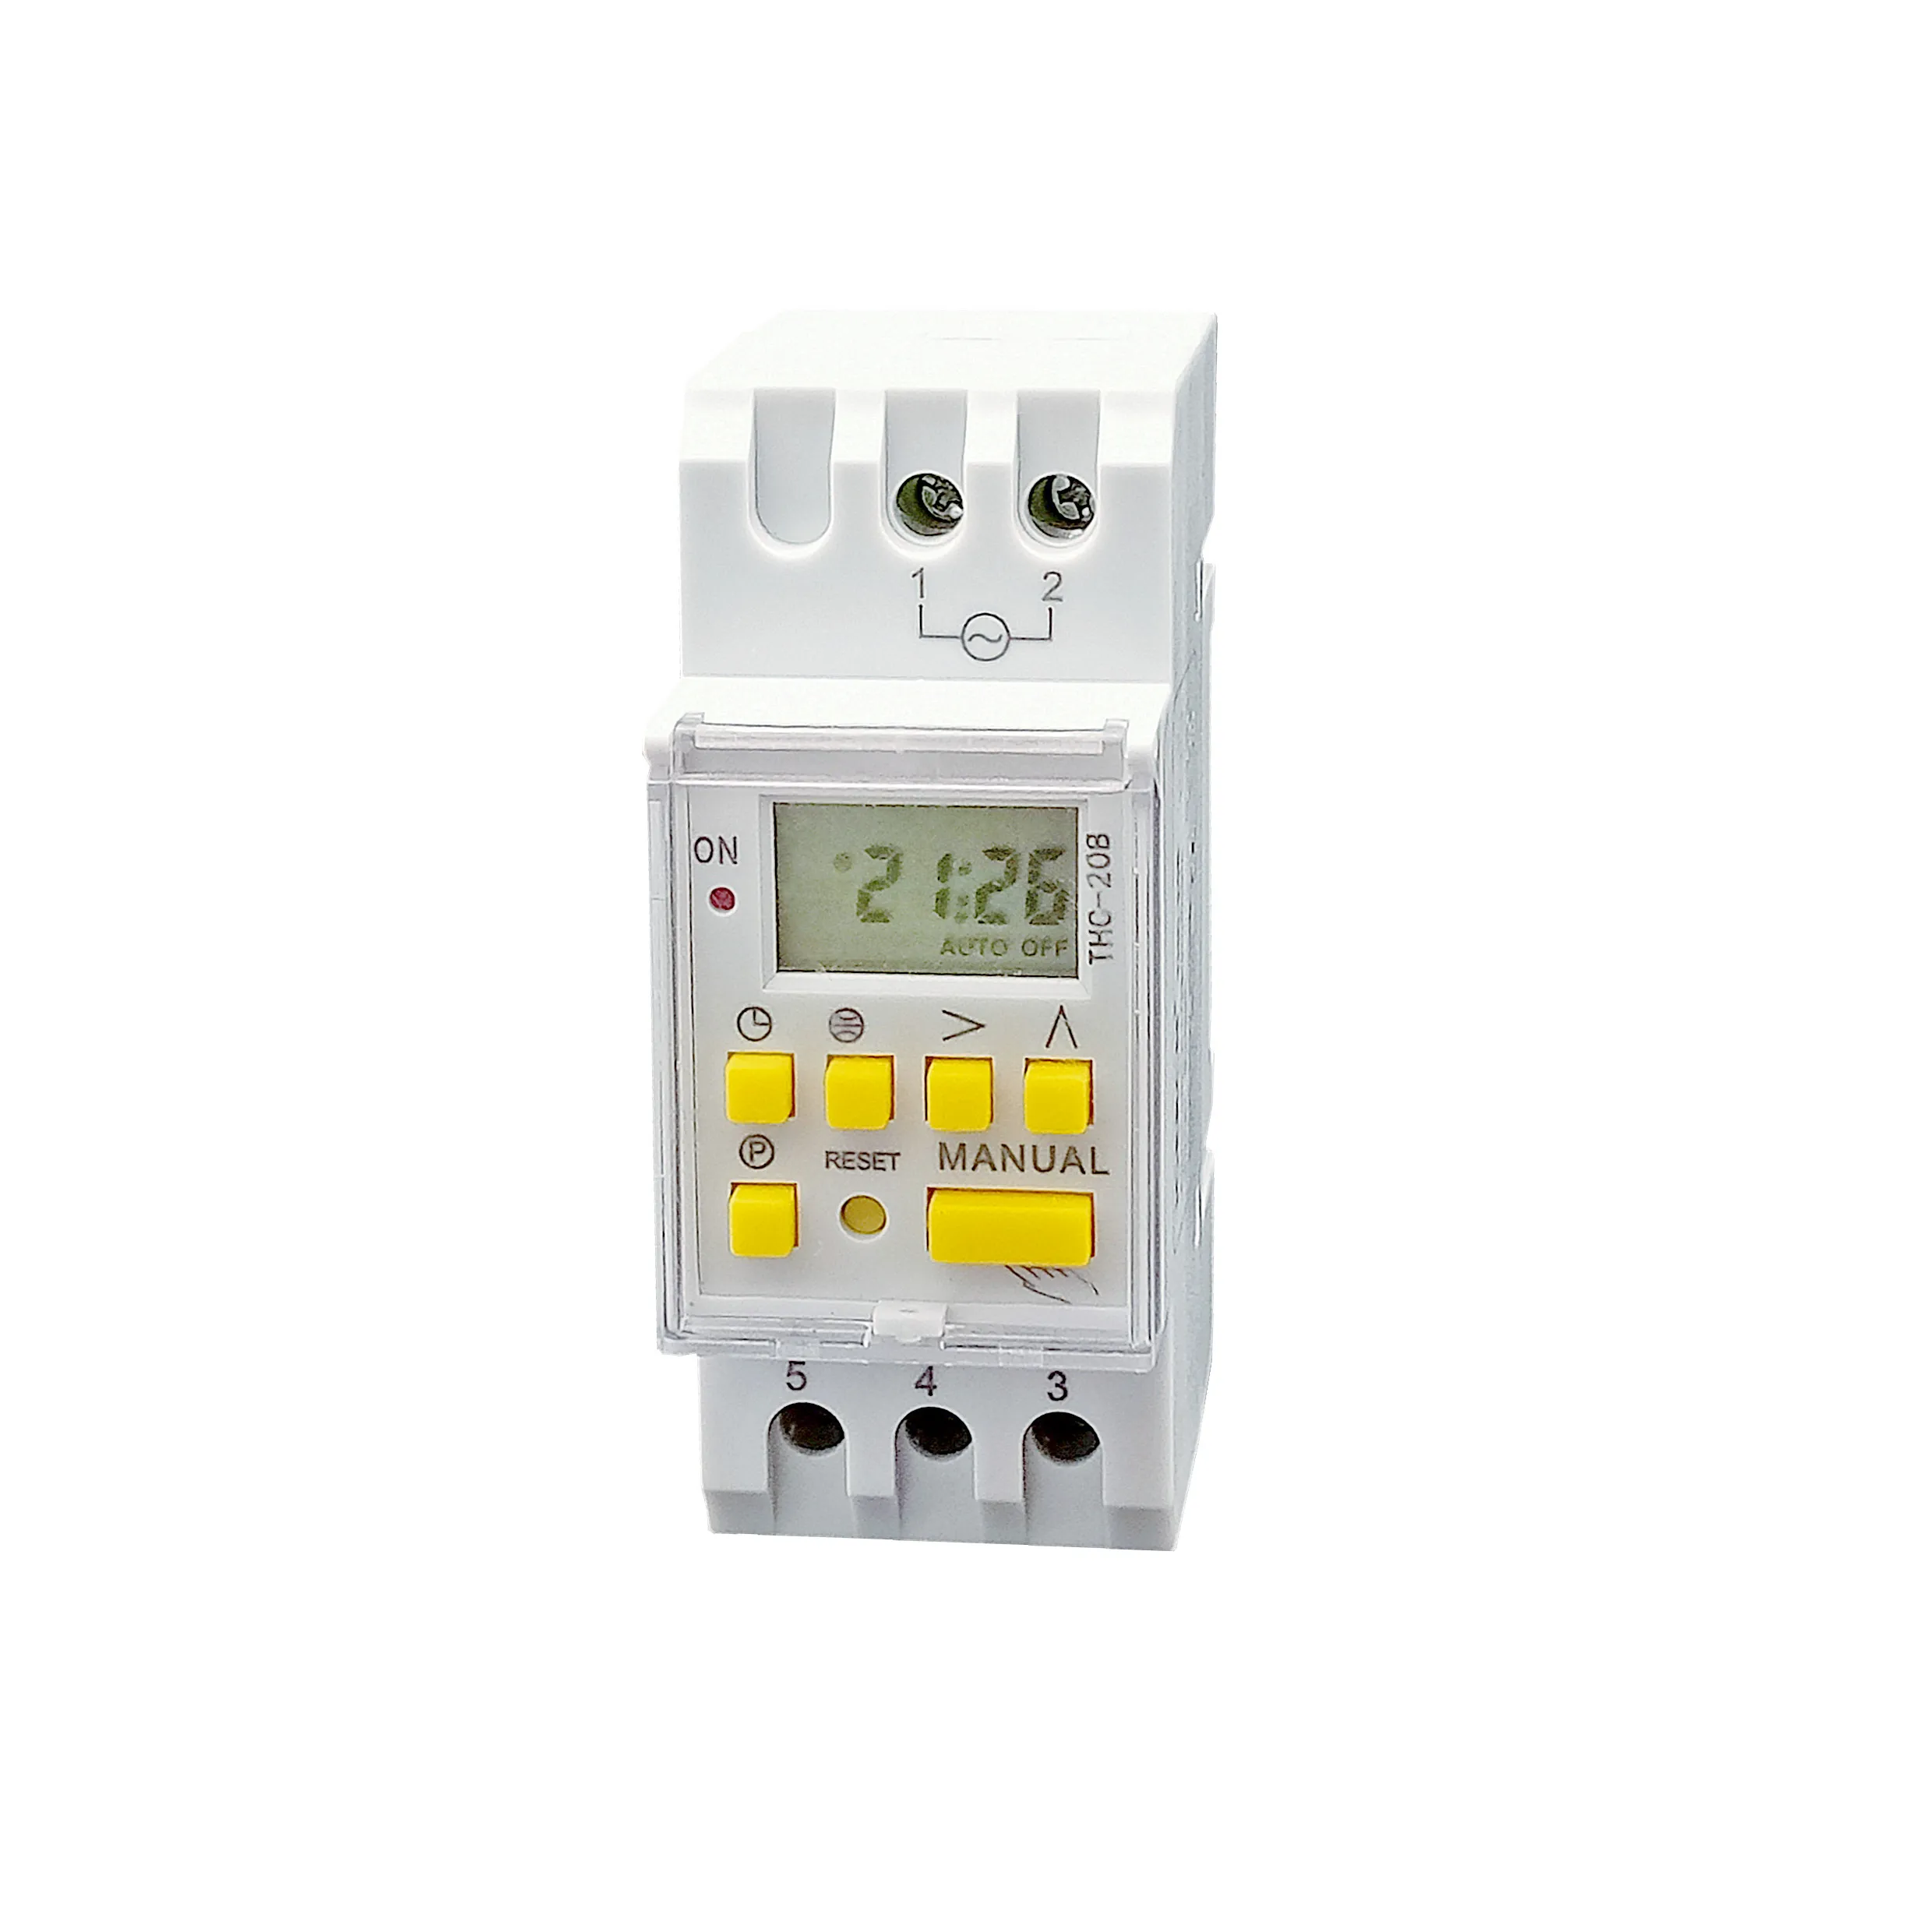 12Vdc Astronomical timer THC 15B  time control switch digital programmable AUTO ON OFF 24hours 7 Days timing latitude switch (1600249761783)